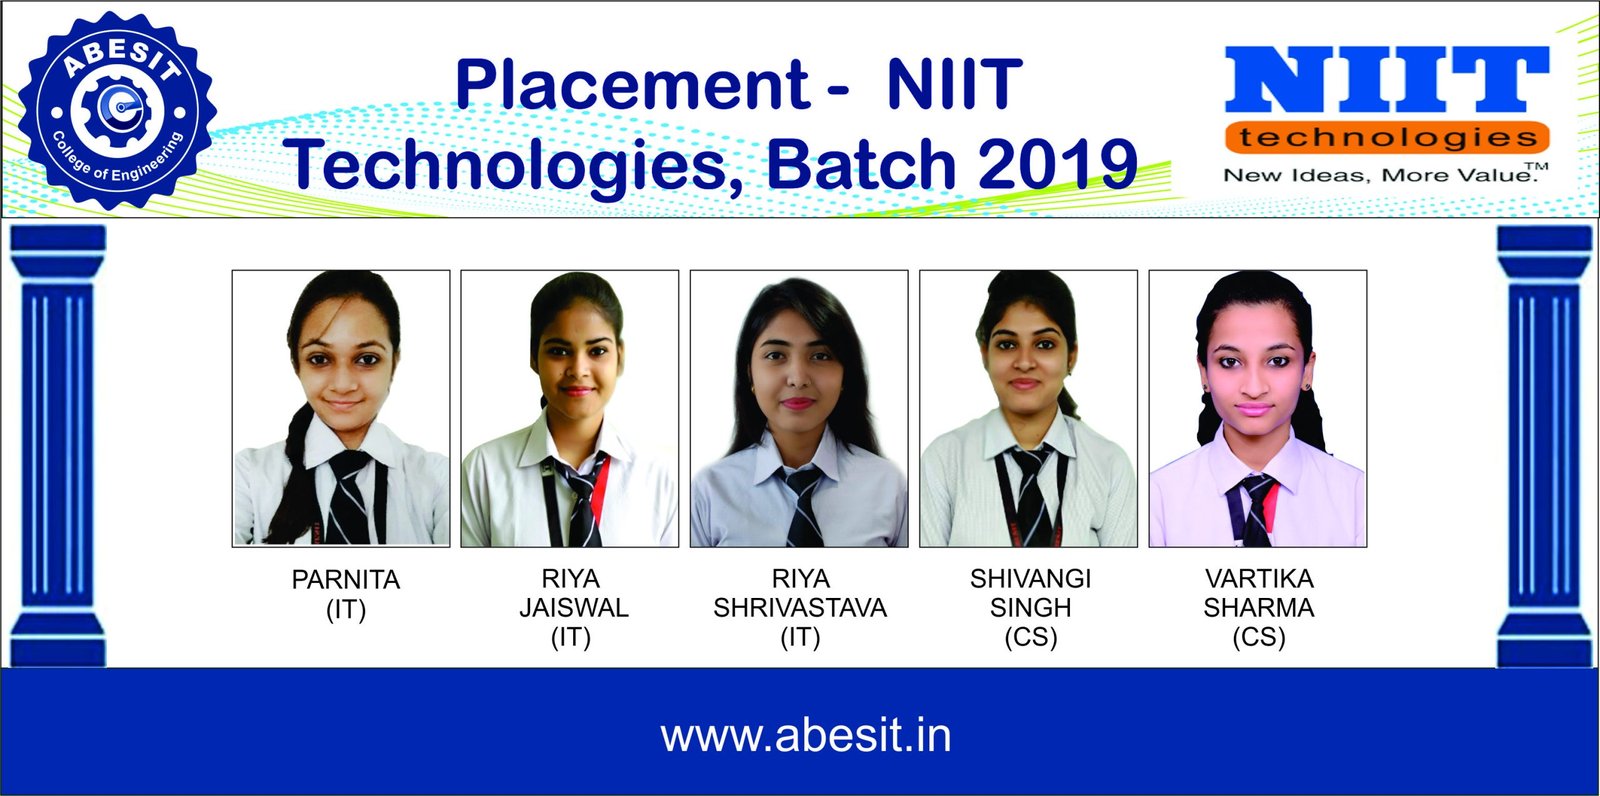 Selections in NIIT Technologies